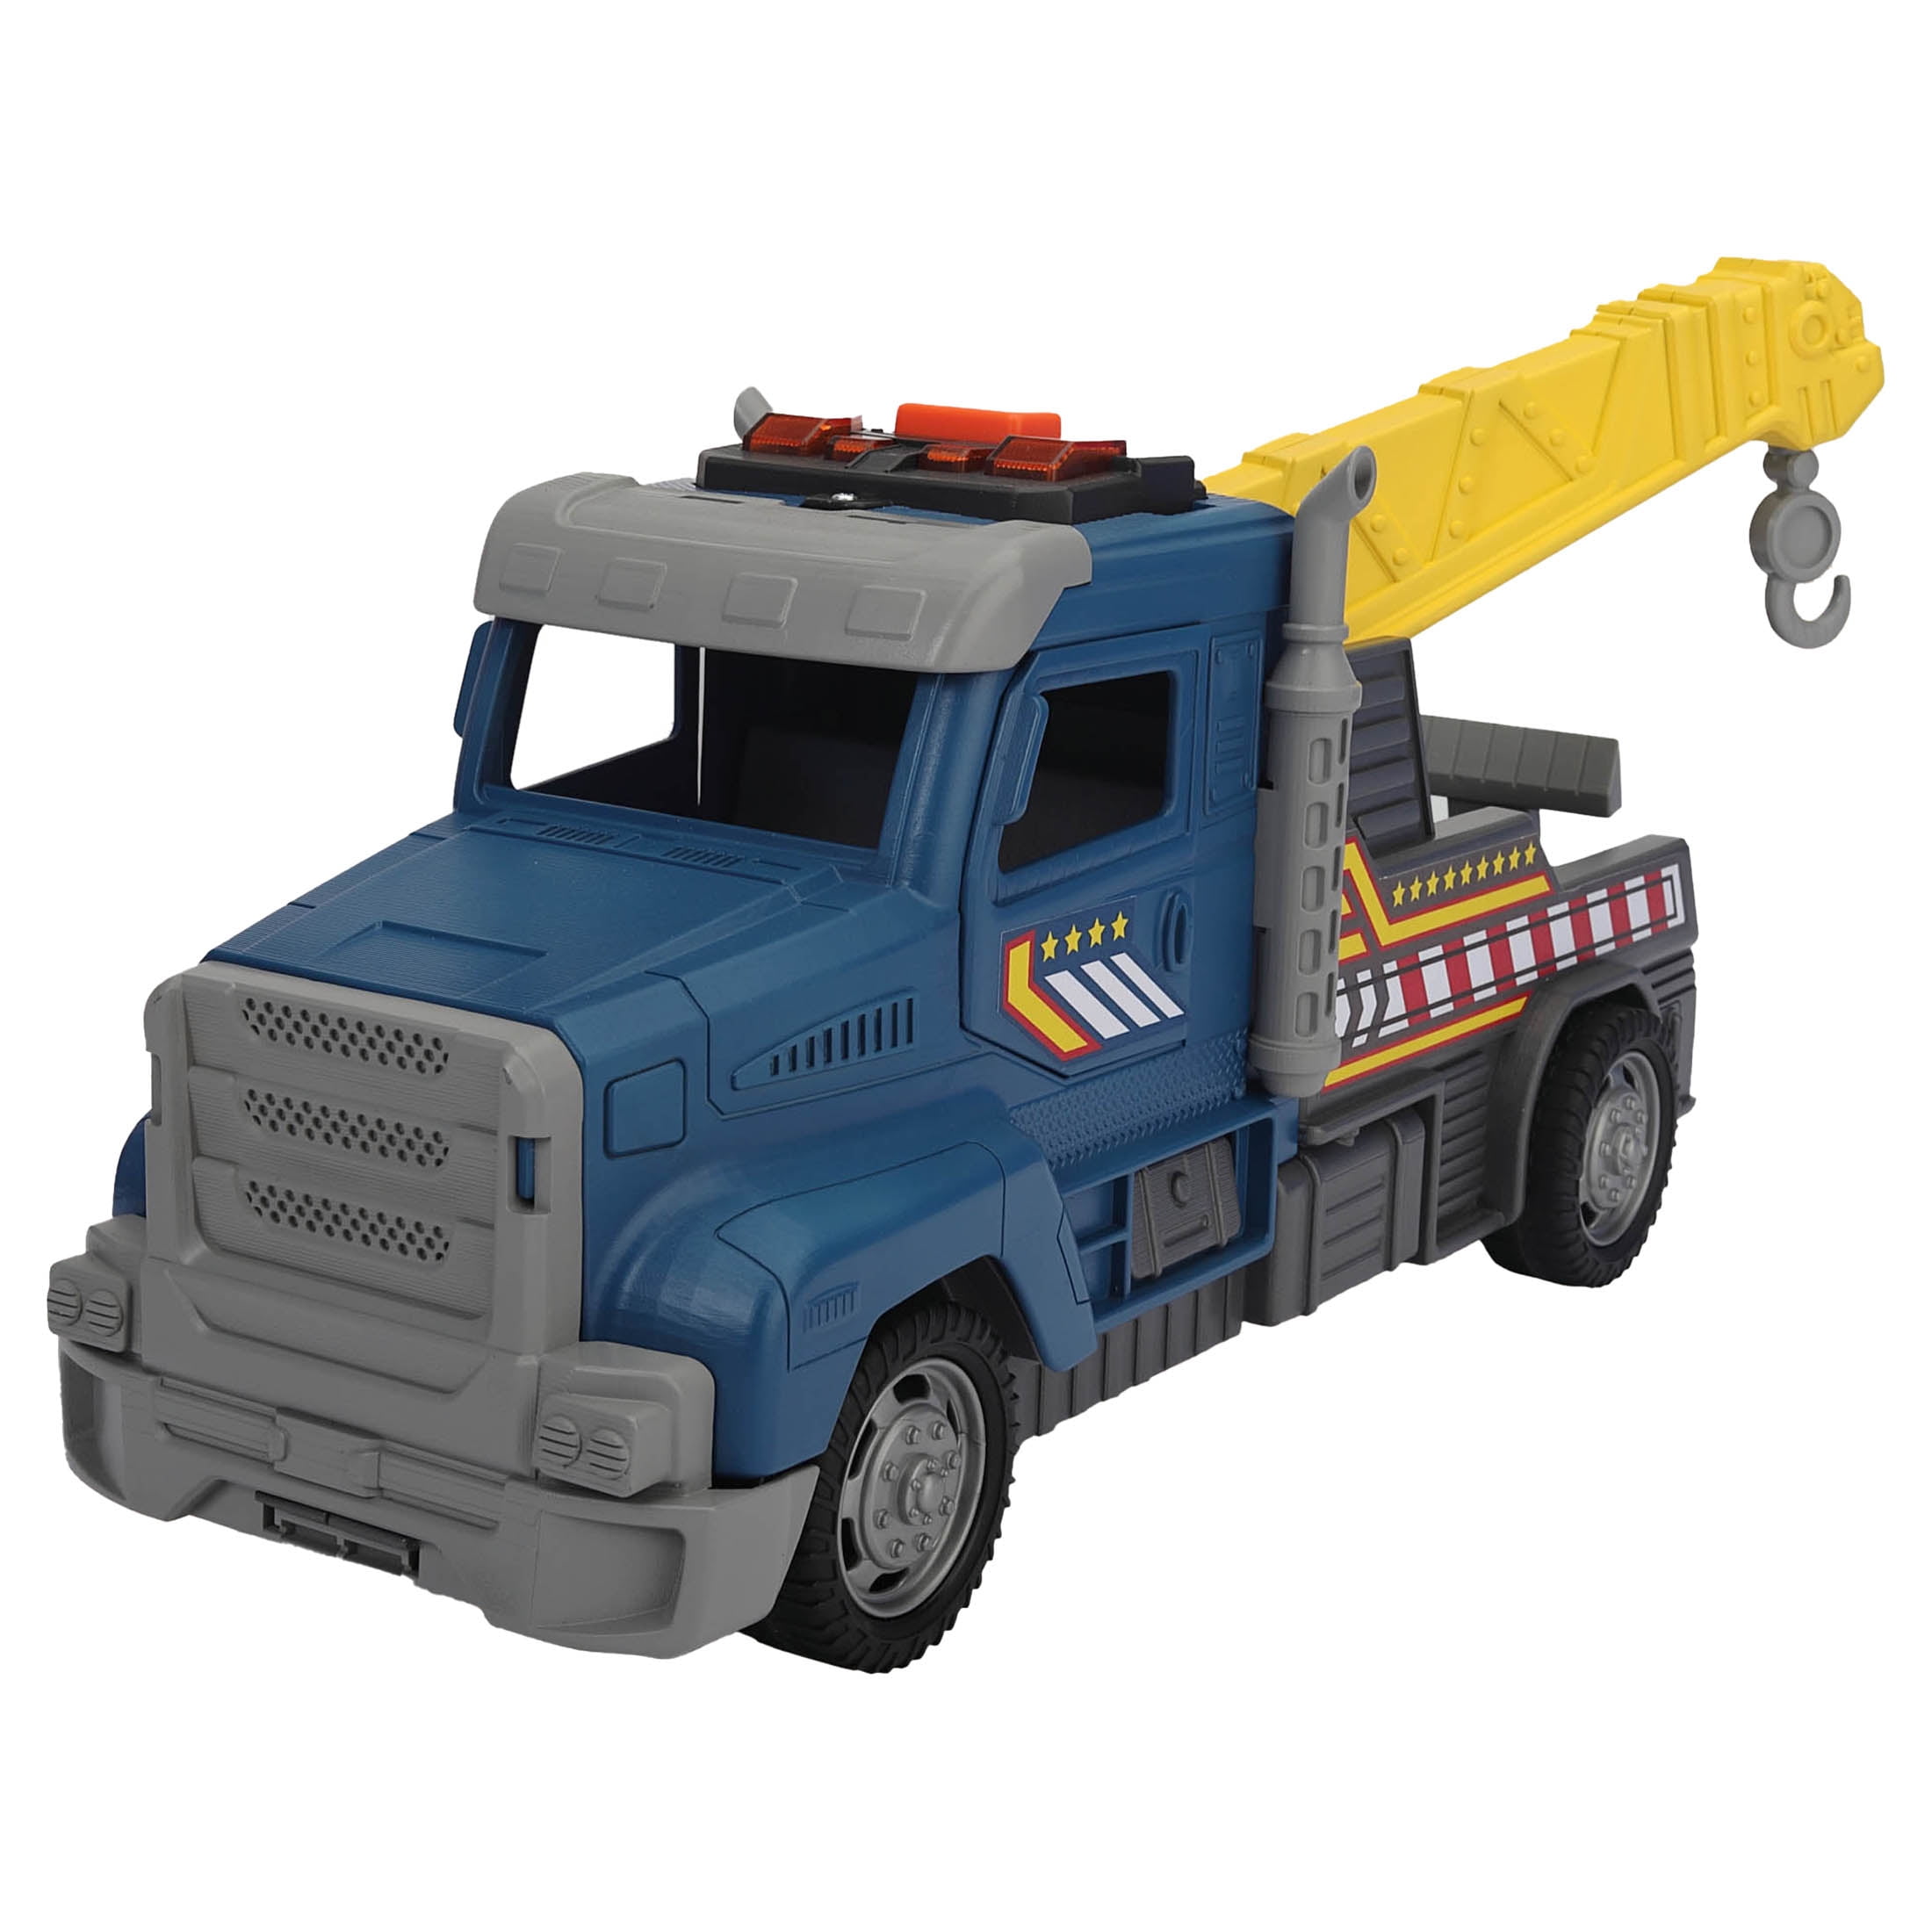 Adventure Force Utility Vehicle with Light & Sound - Tow Truck, Ages 3 and up